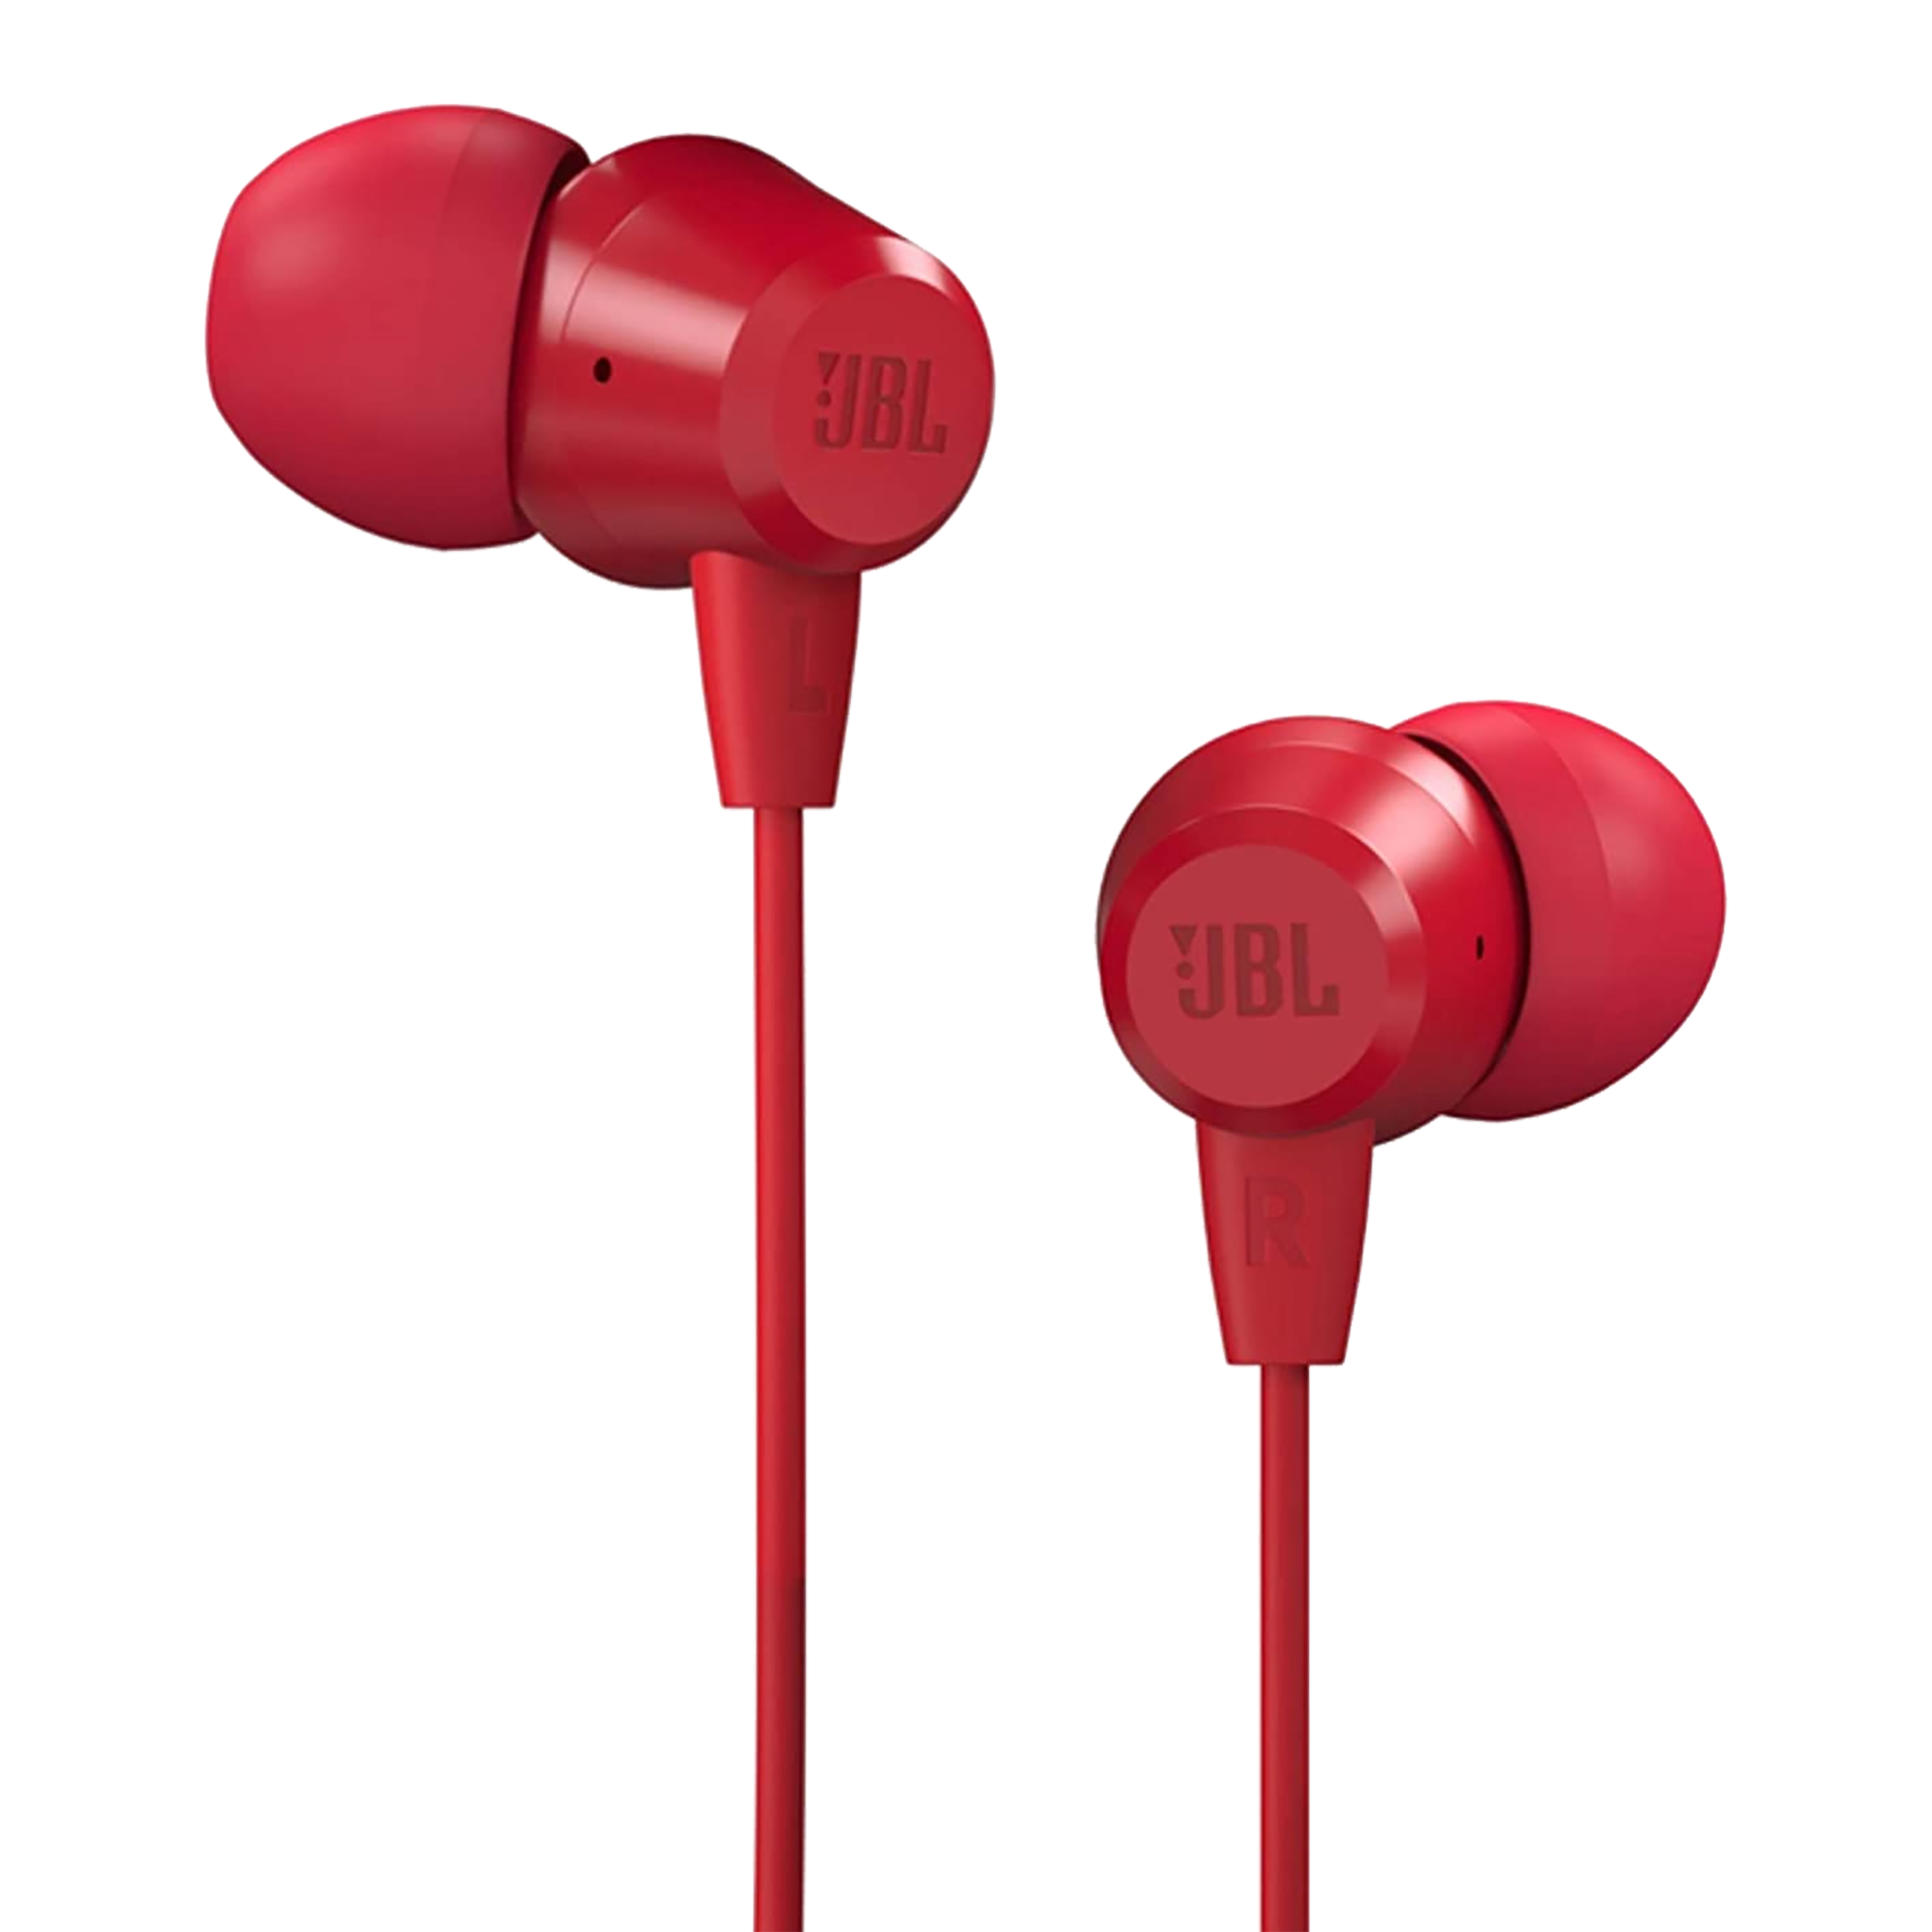 JBL JBLT50HIREDIN In-Ear Wired Earphone with Mic (Lightweight and Comfortable, Red)